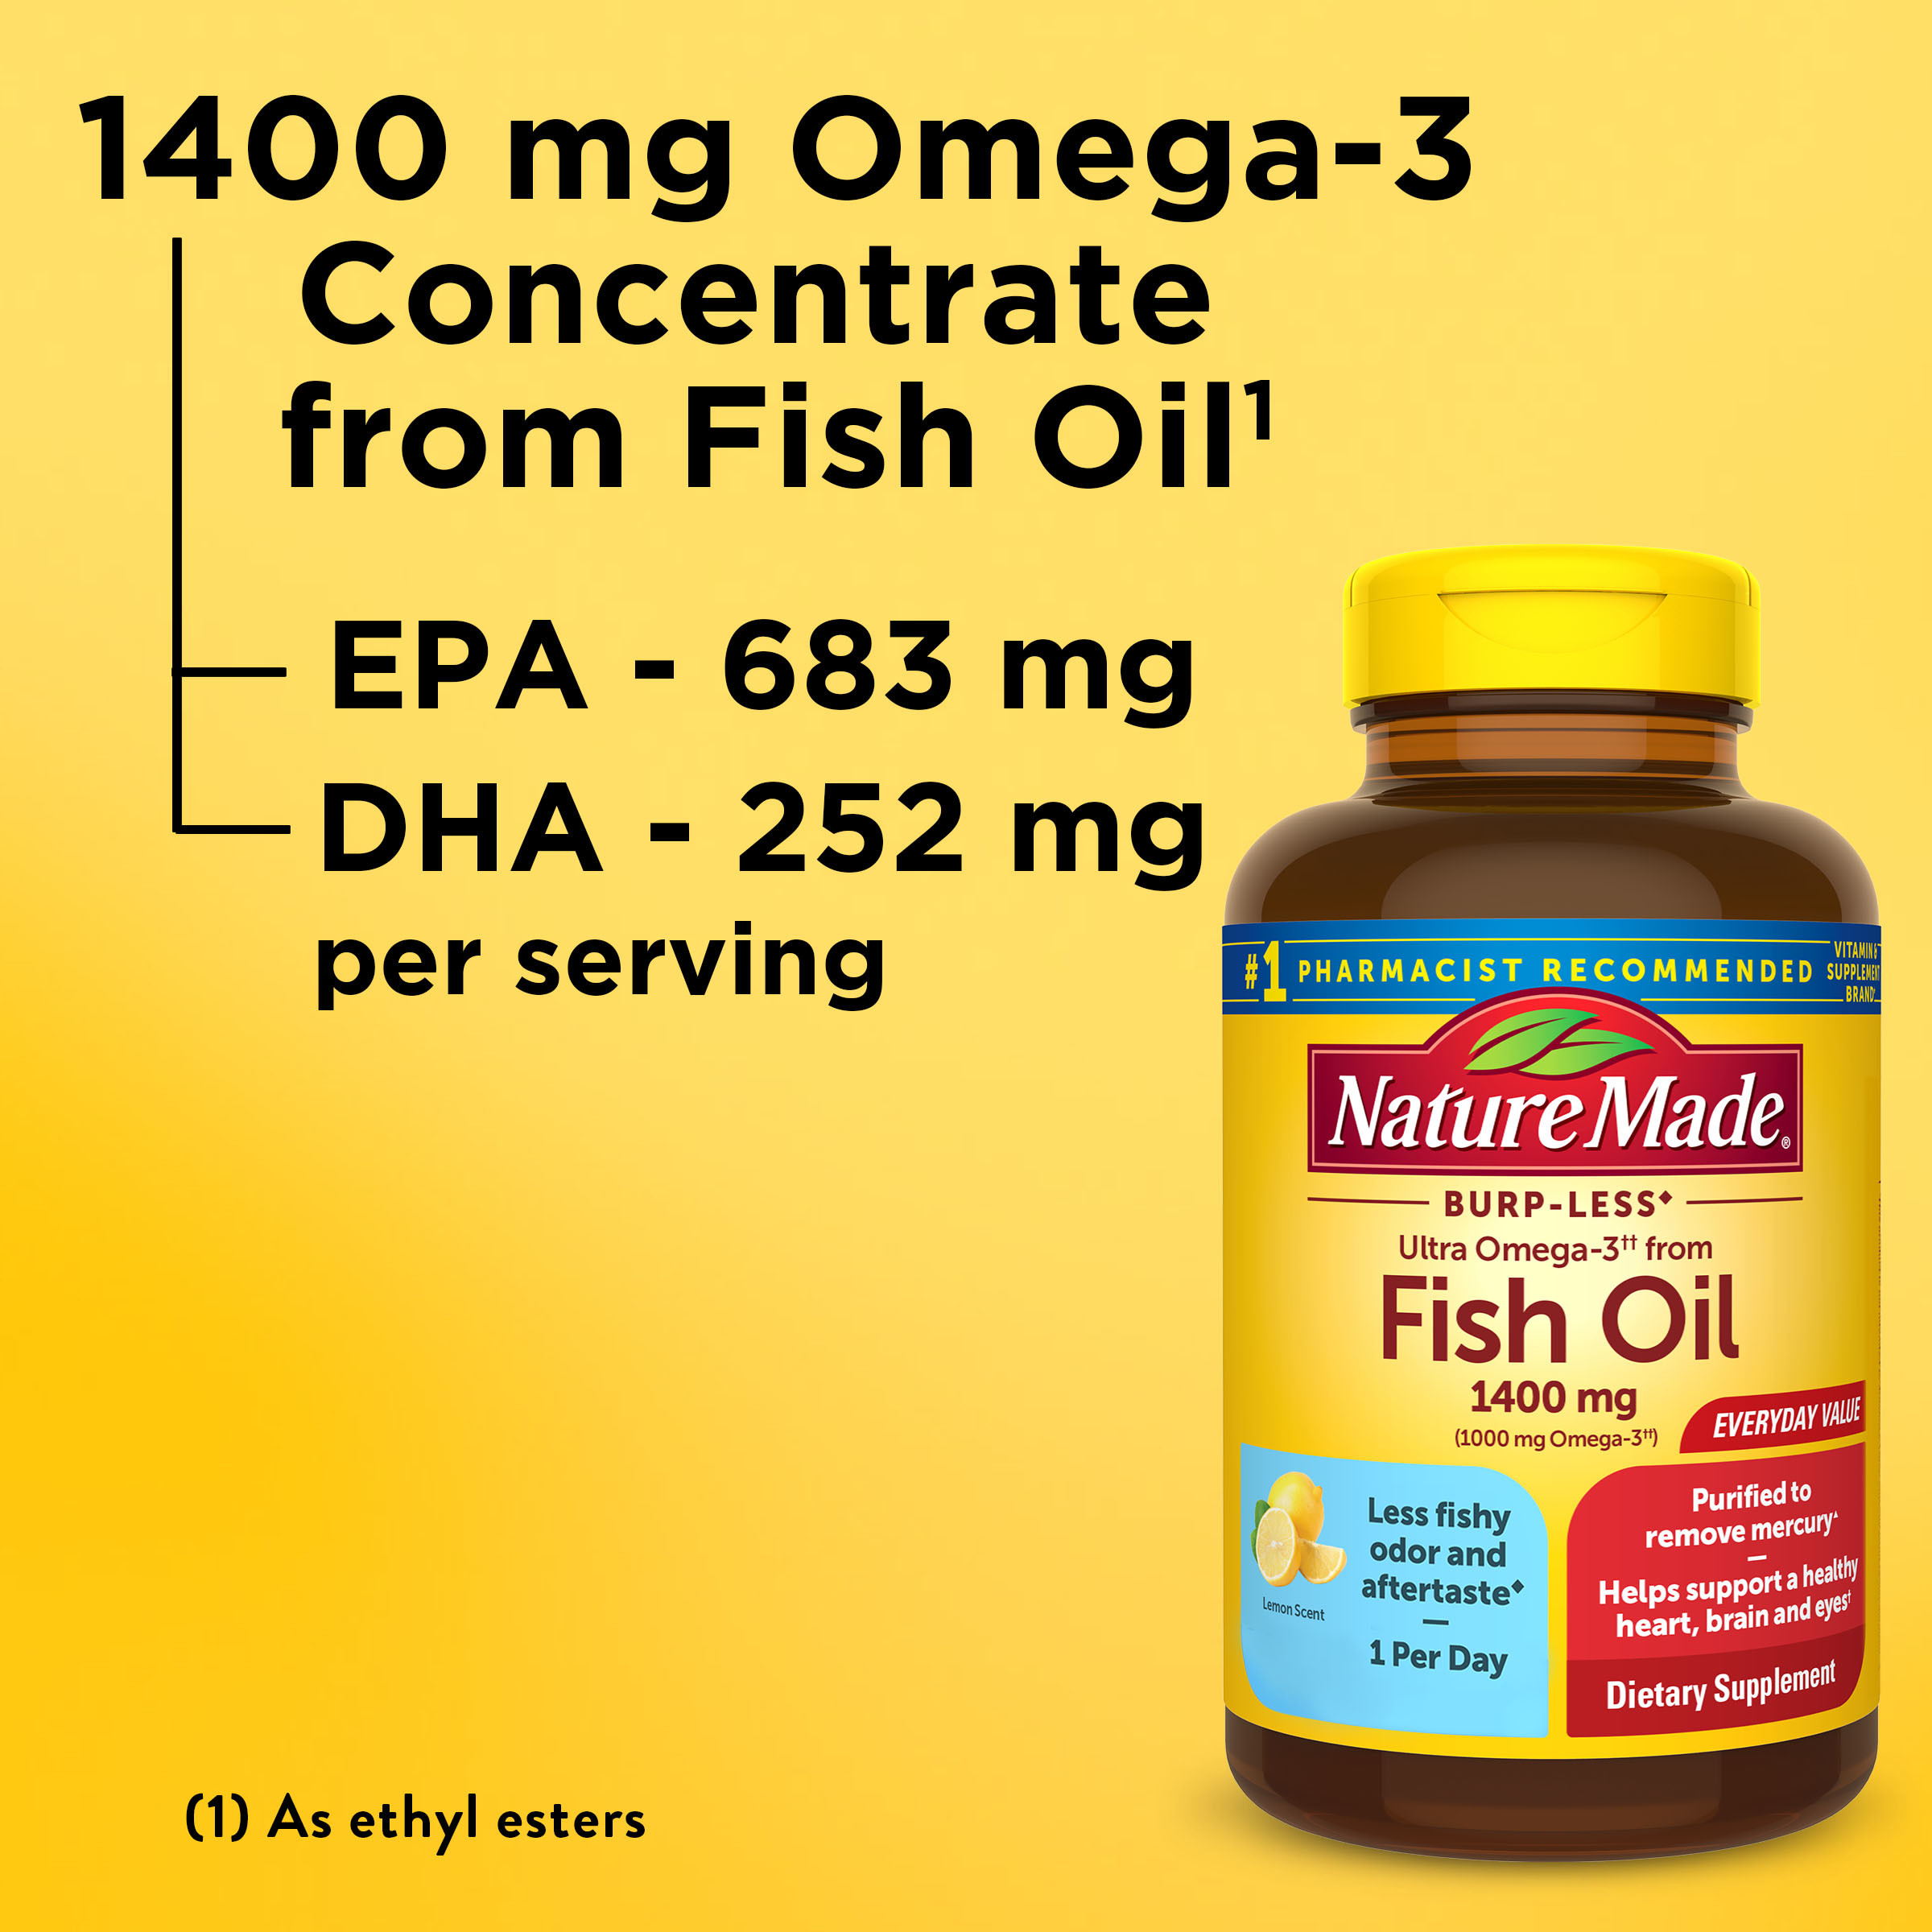 Nature Made Burp Less Ultra Omega 3 Fish Oil 1400 mg Softgels, Fish Oil Supplements, 100 Count - image 5 of 14